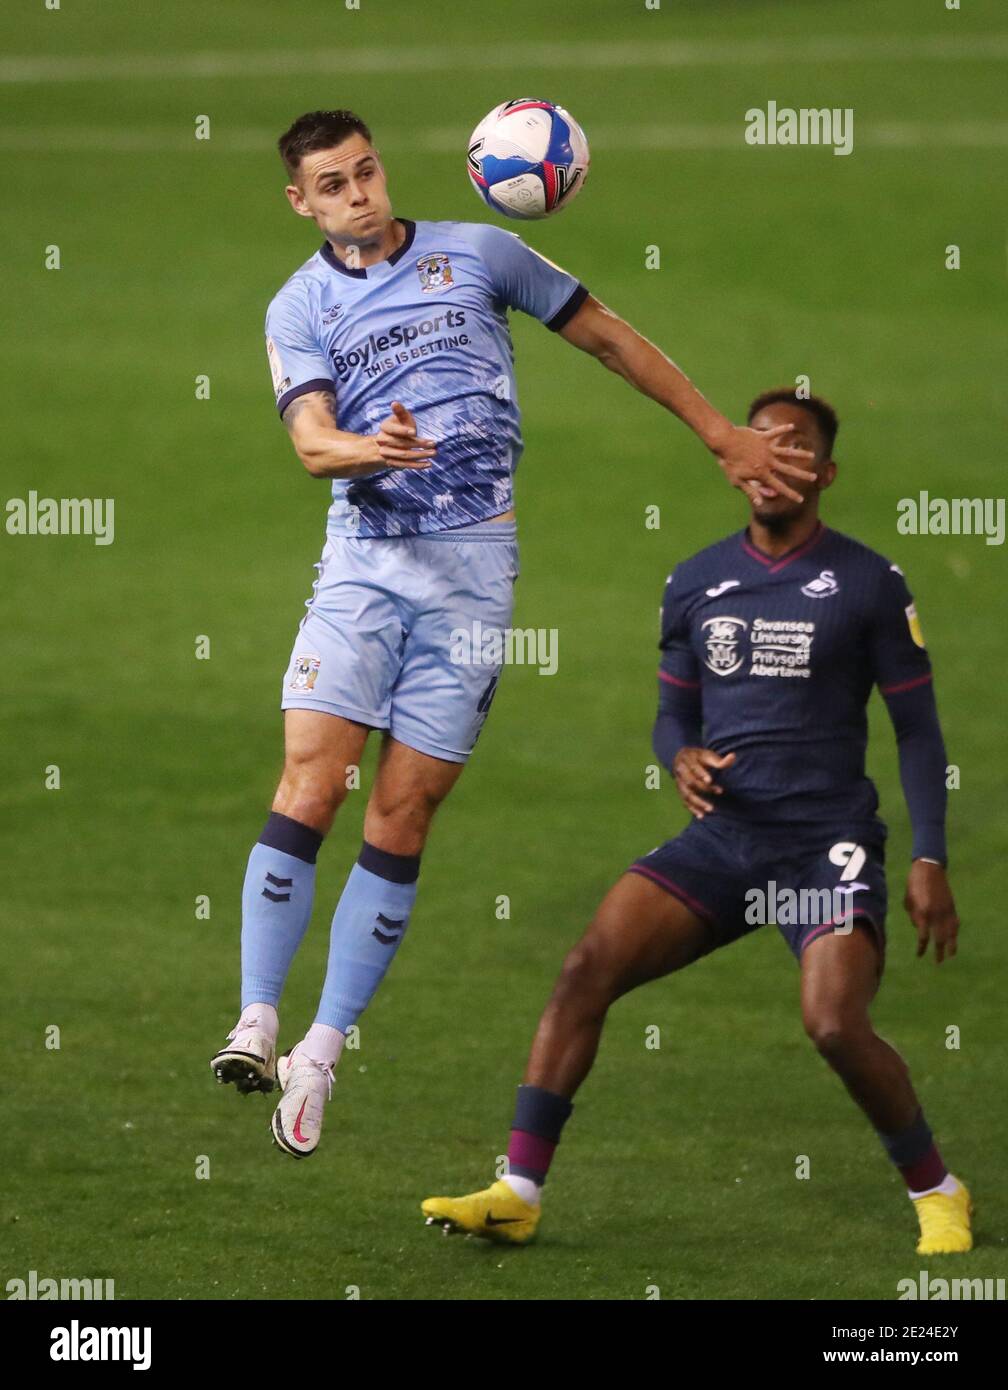 Coventry City's Michael Rose controls the ball on his chest during the Sky Bet Championship match at St. Andrew's Trillion Trophy Stadium, Birmingham. Stock Photo